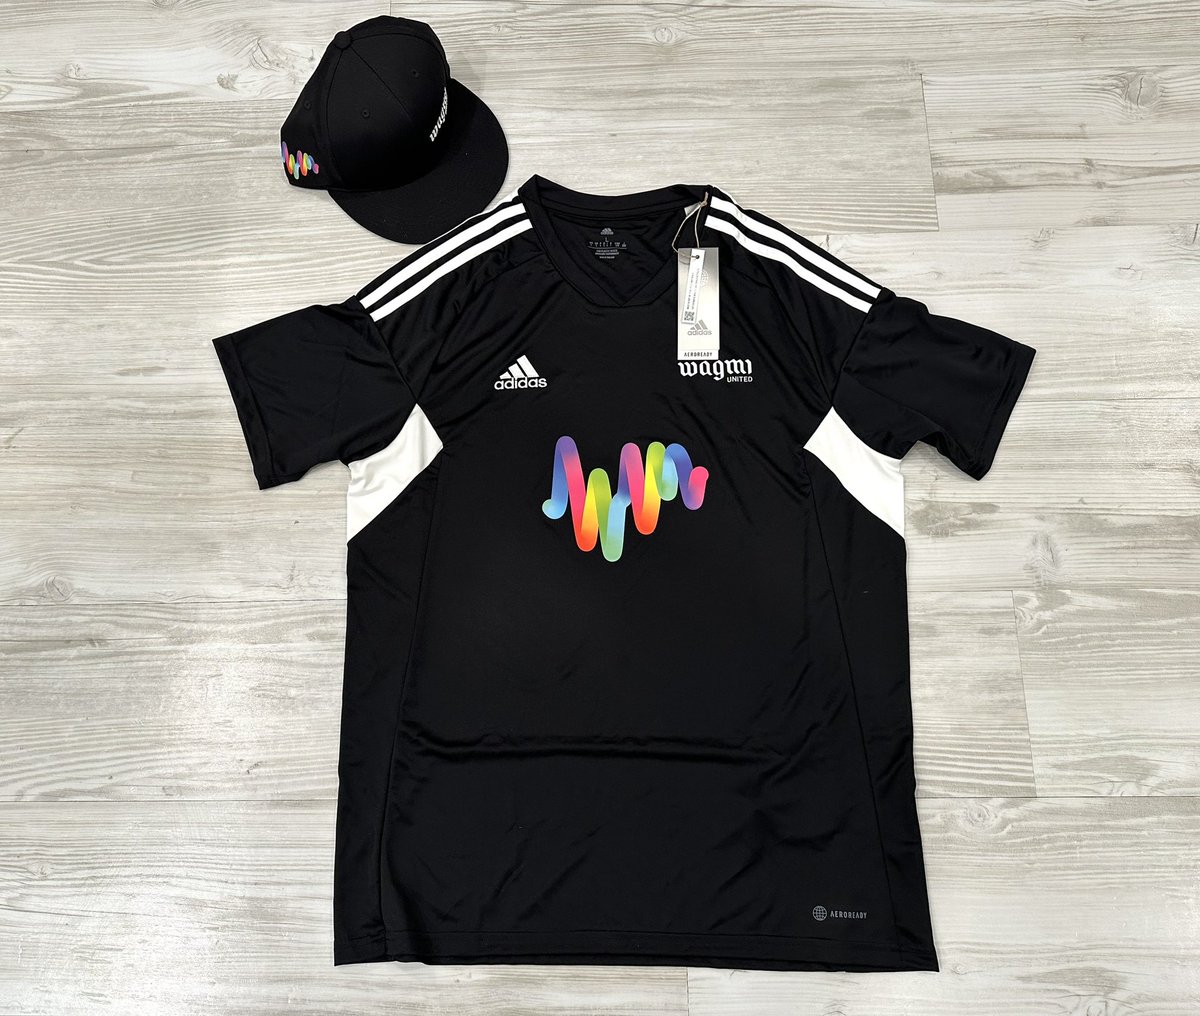 Think I bought the generational bottom on this jersey + hat pairing @WAGMIUnited ⚽️